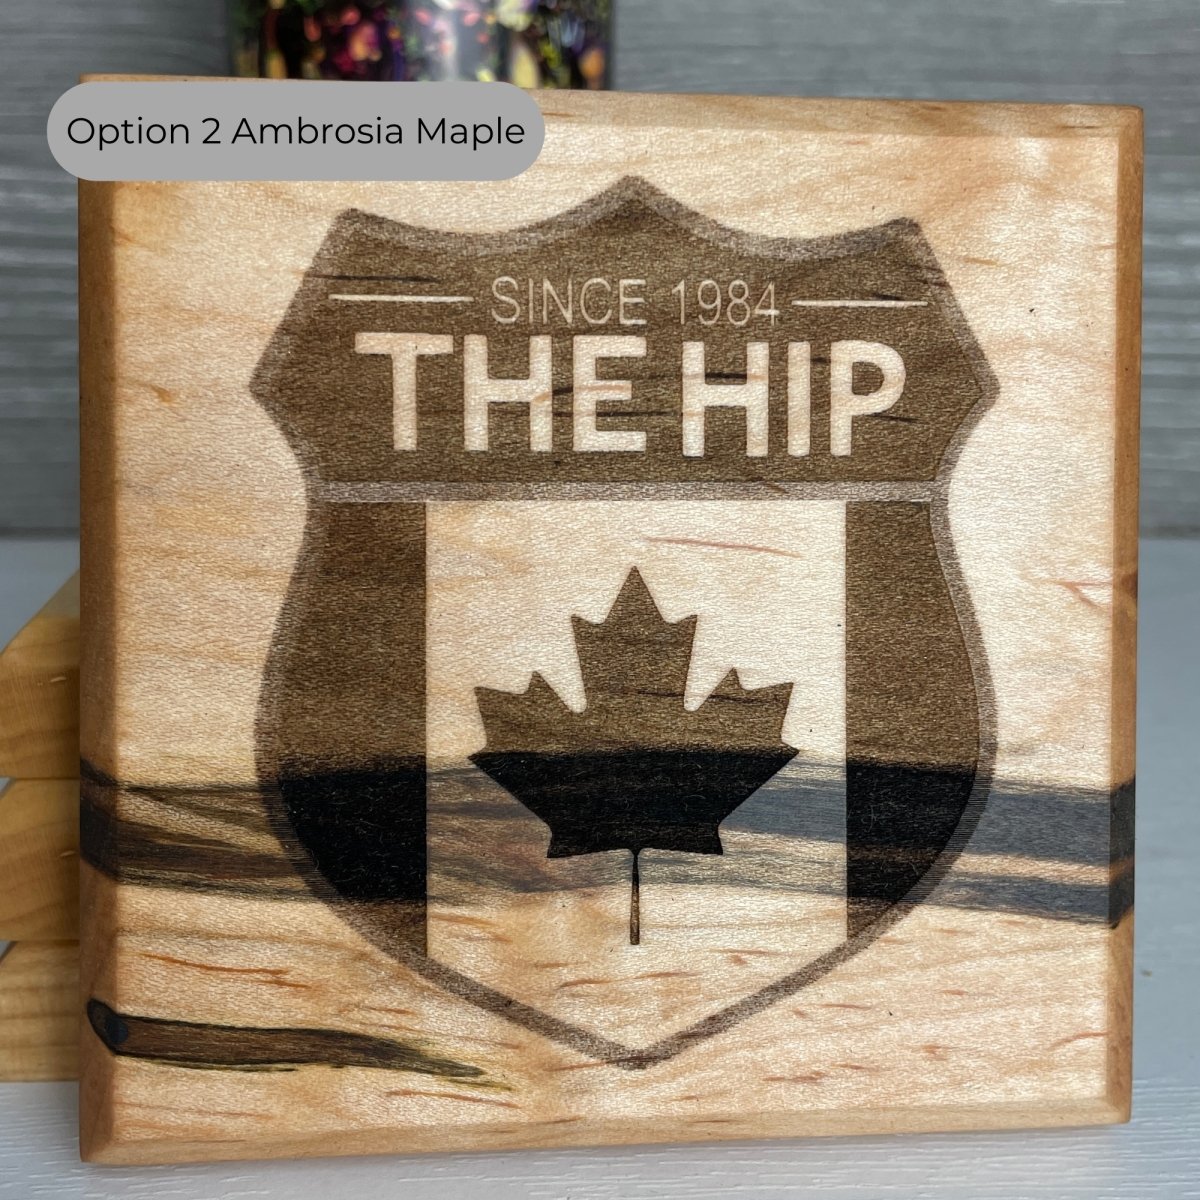 The Tragically Hip Wood Coaster Sets of 4 - DaRosa Creations